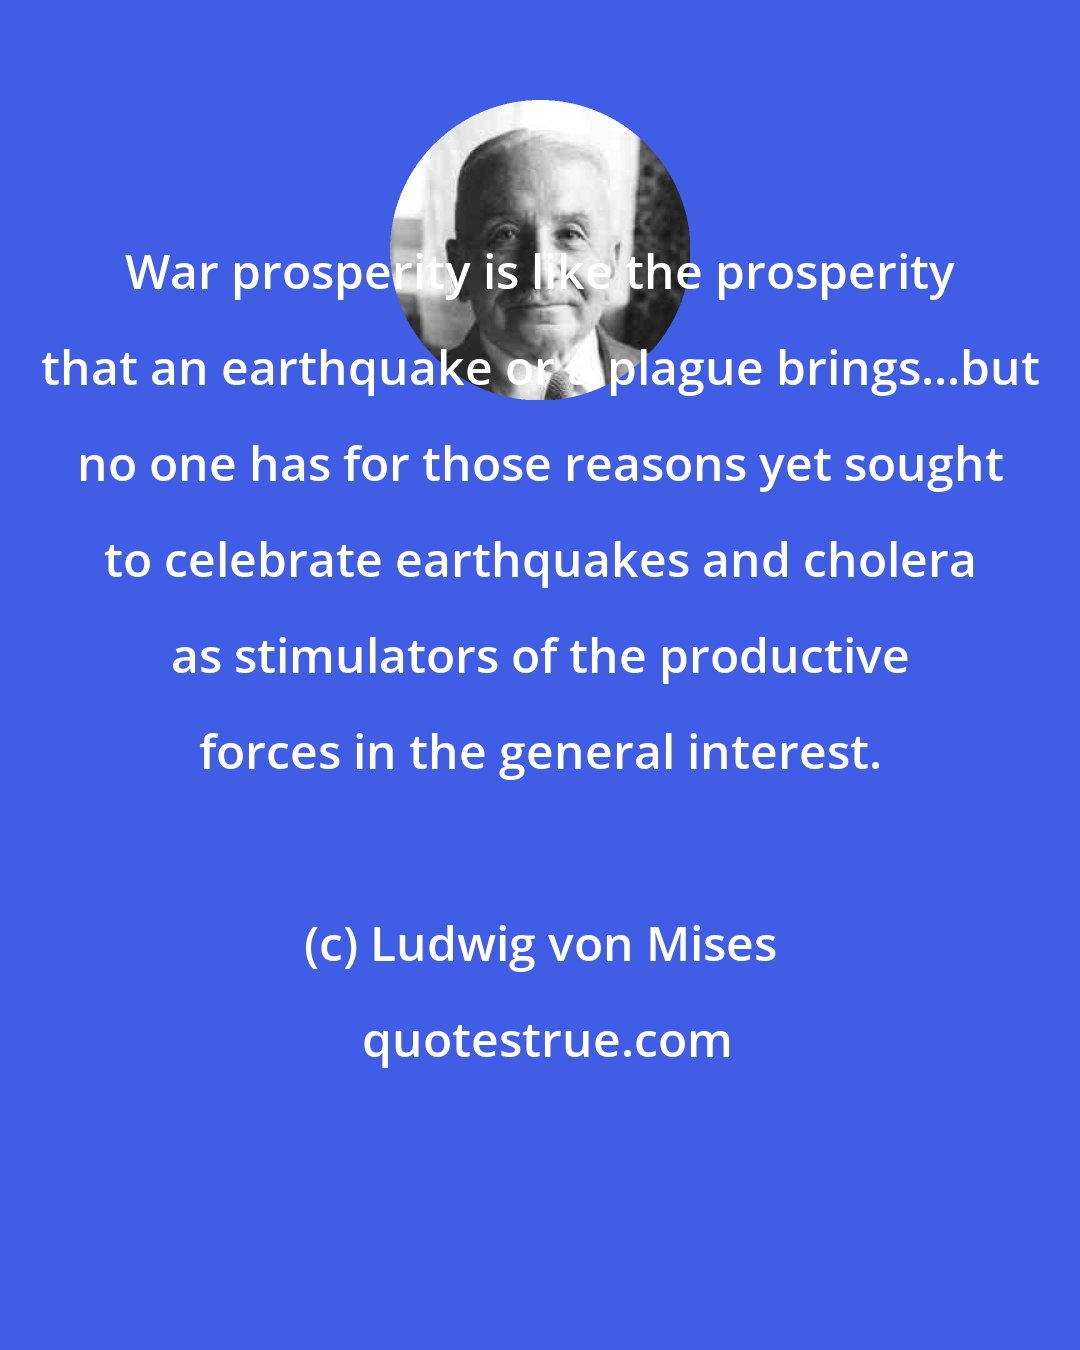 Ludwig von Mises: War prosperity is like the prosperity that an earthquake or a plague brings...but no one has for those reasons yet sought to celebrate earthquakes and cholera as stimulators of the productive forces in the general interest.